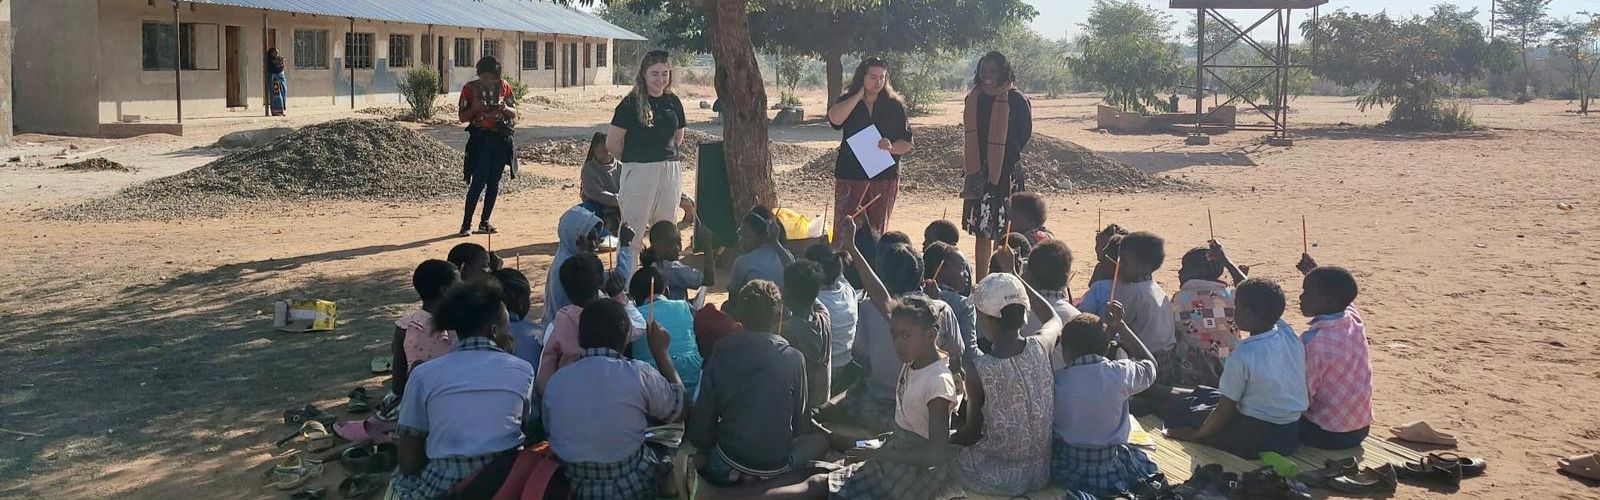 What to expect from a Gender Equality Internship In Zambia